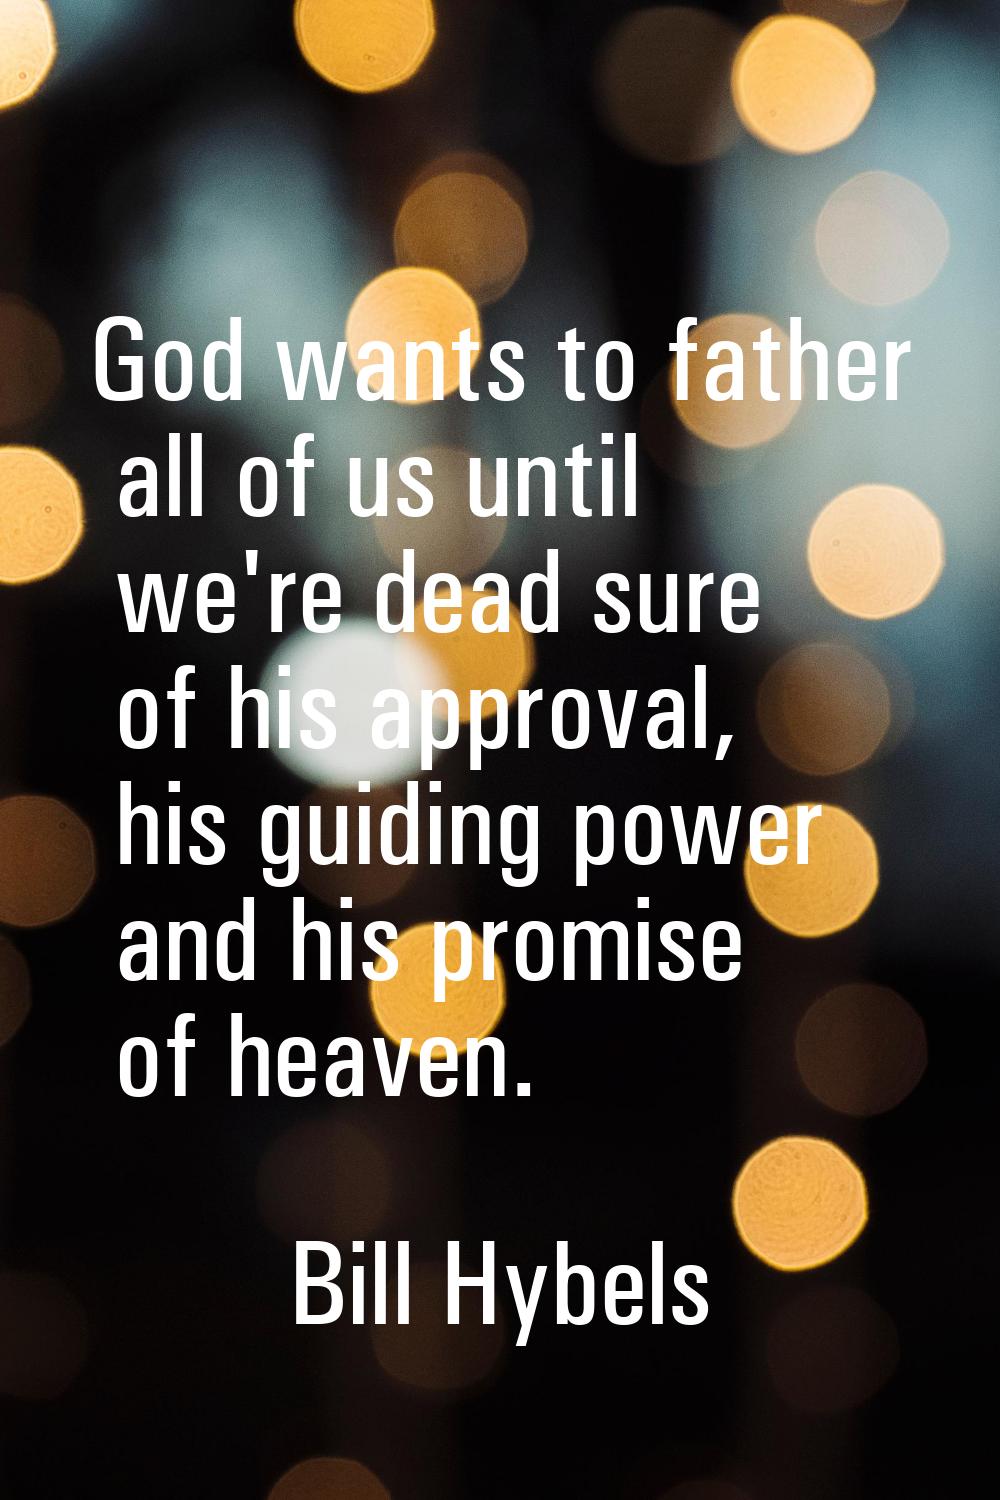 God wants to father all of us until we're dead sure of his approval, his guiding power and his prom